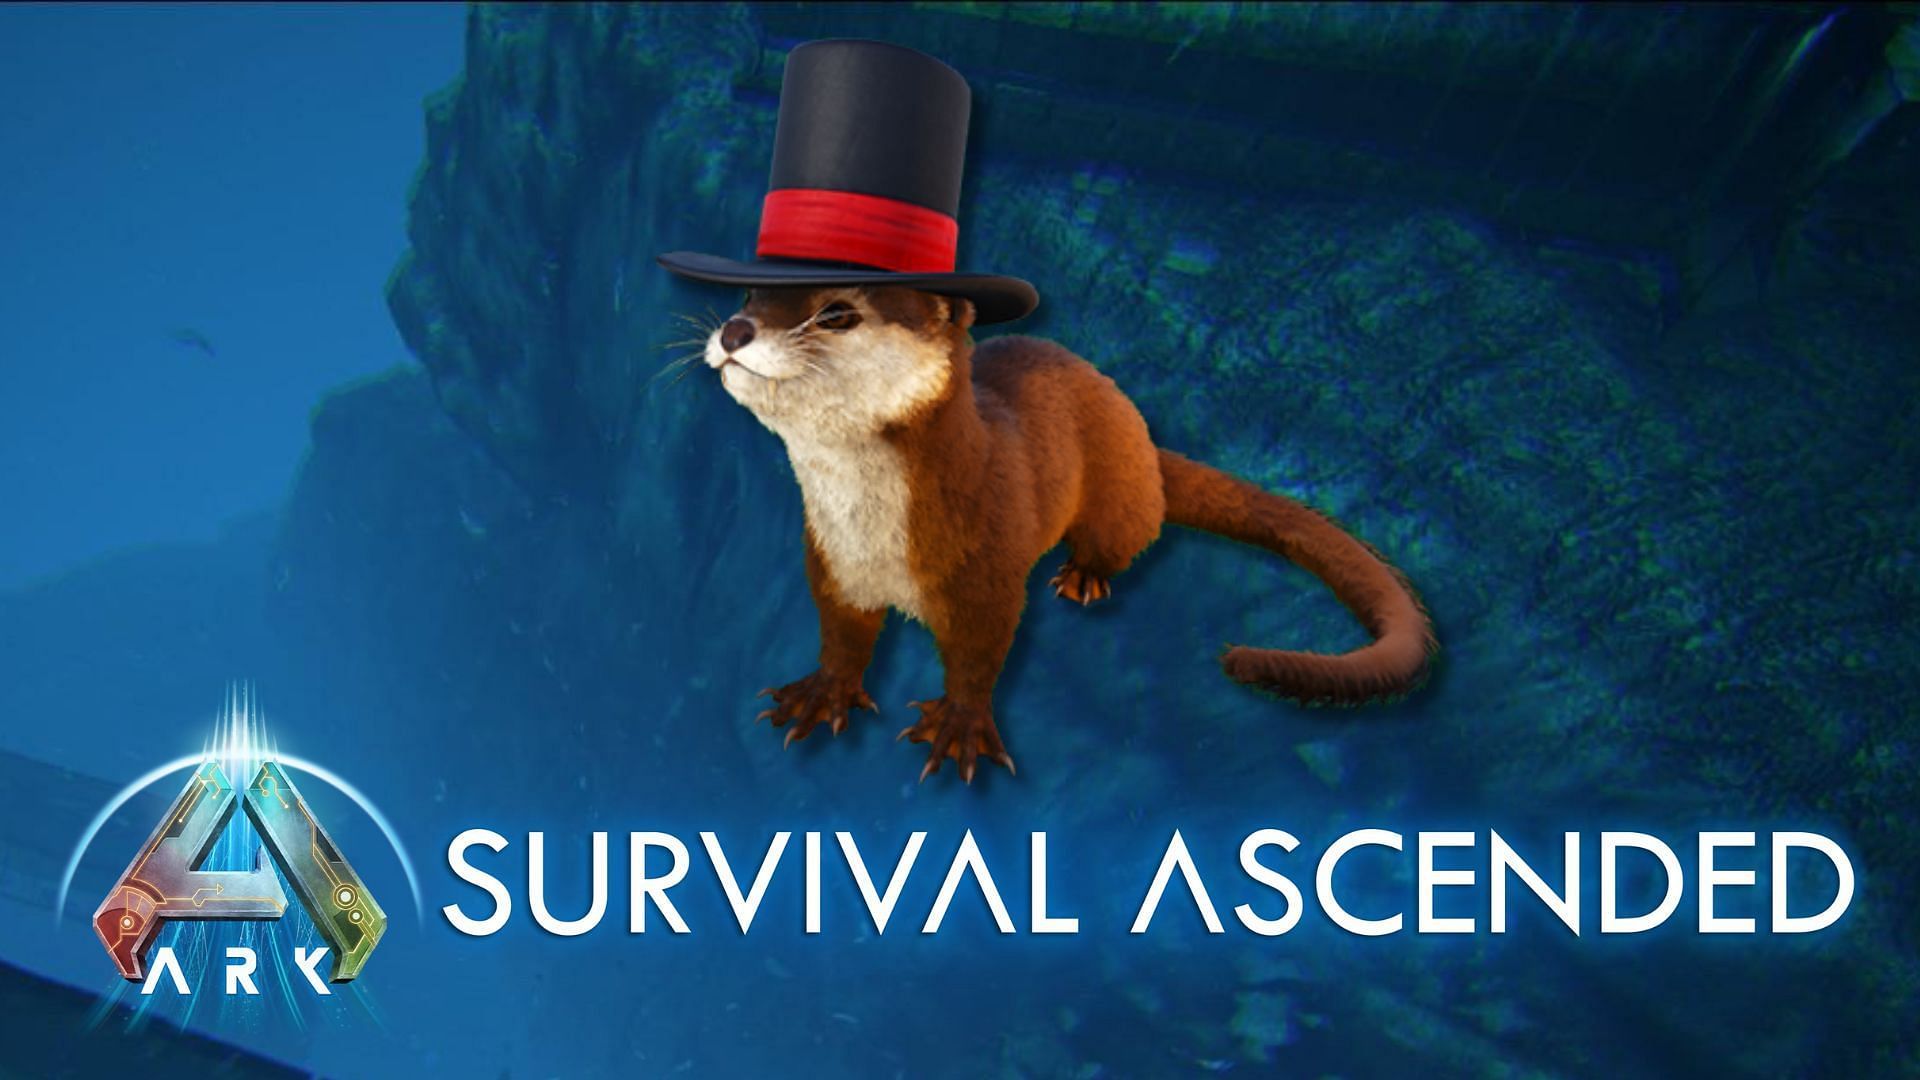 Taming ARK Ascended Otters